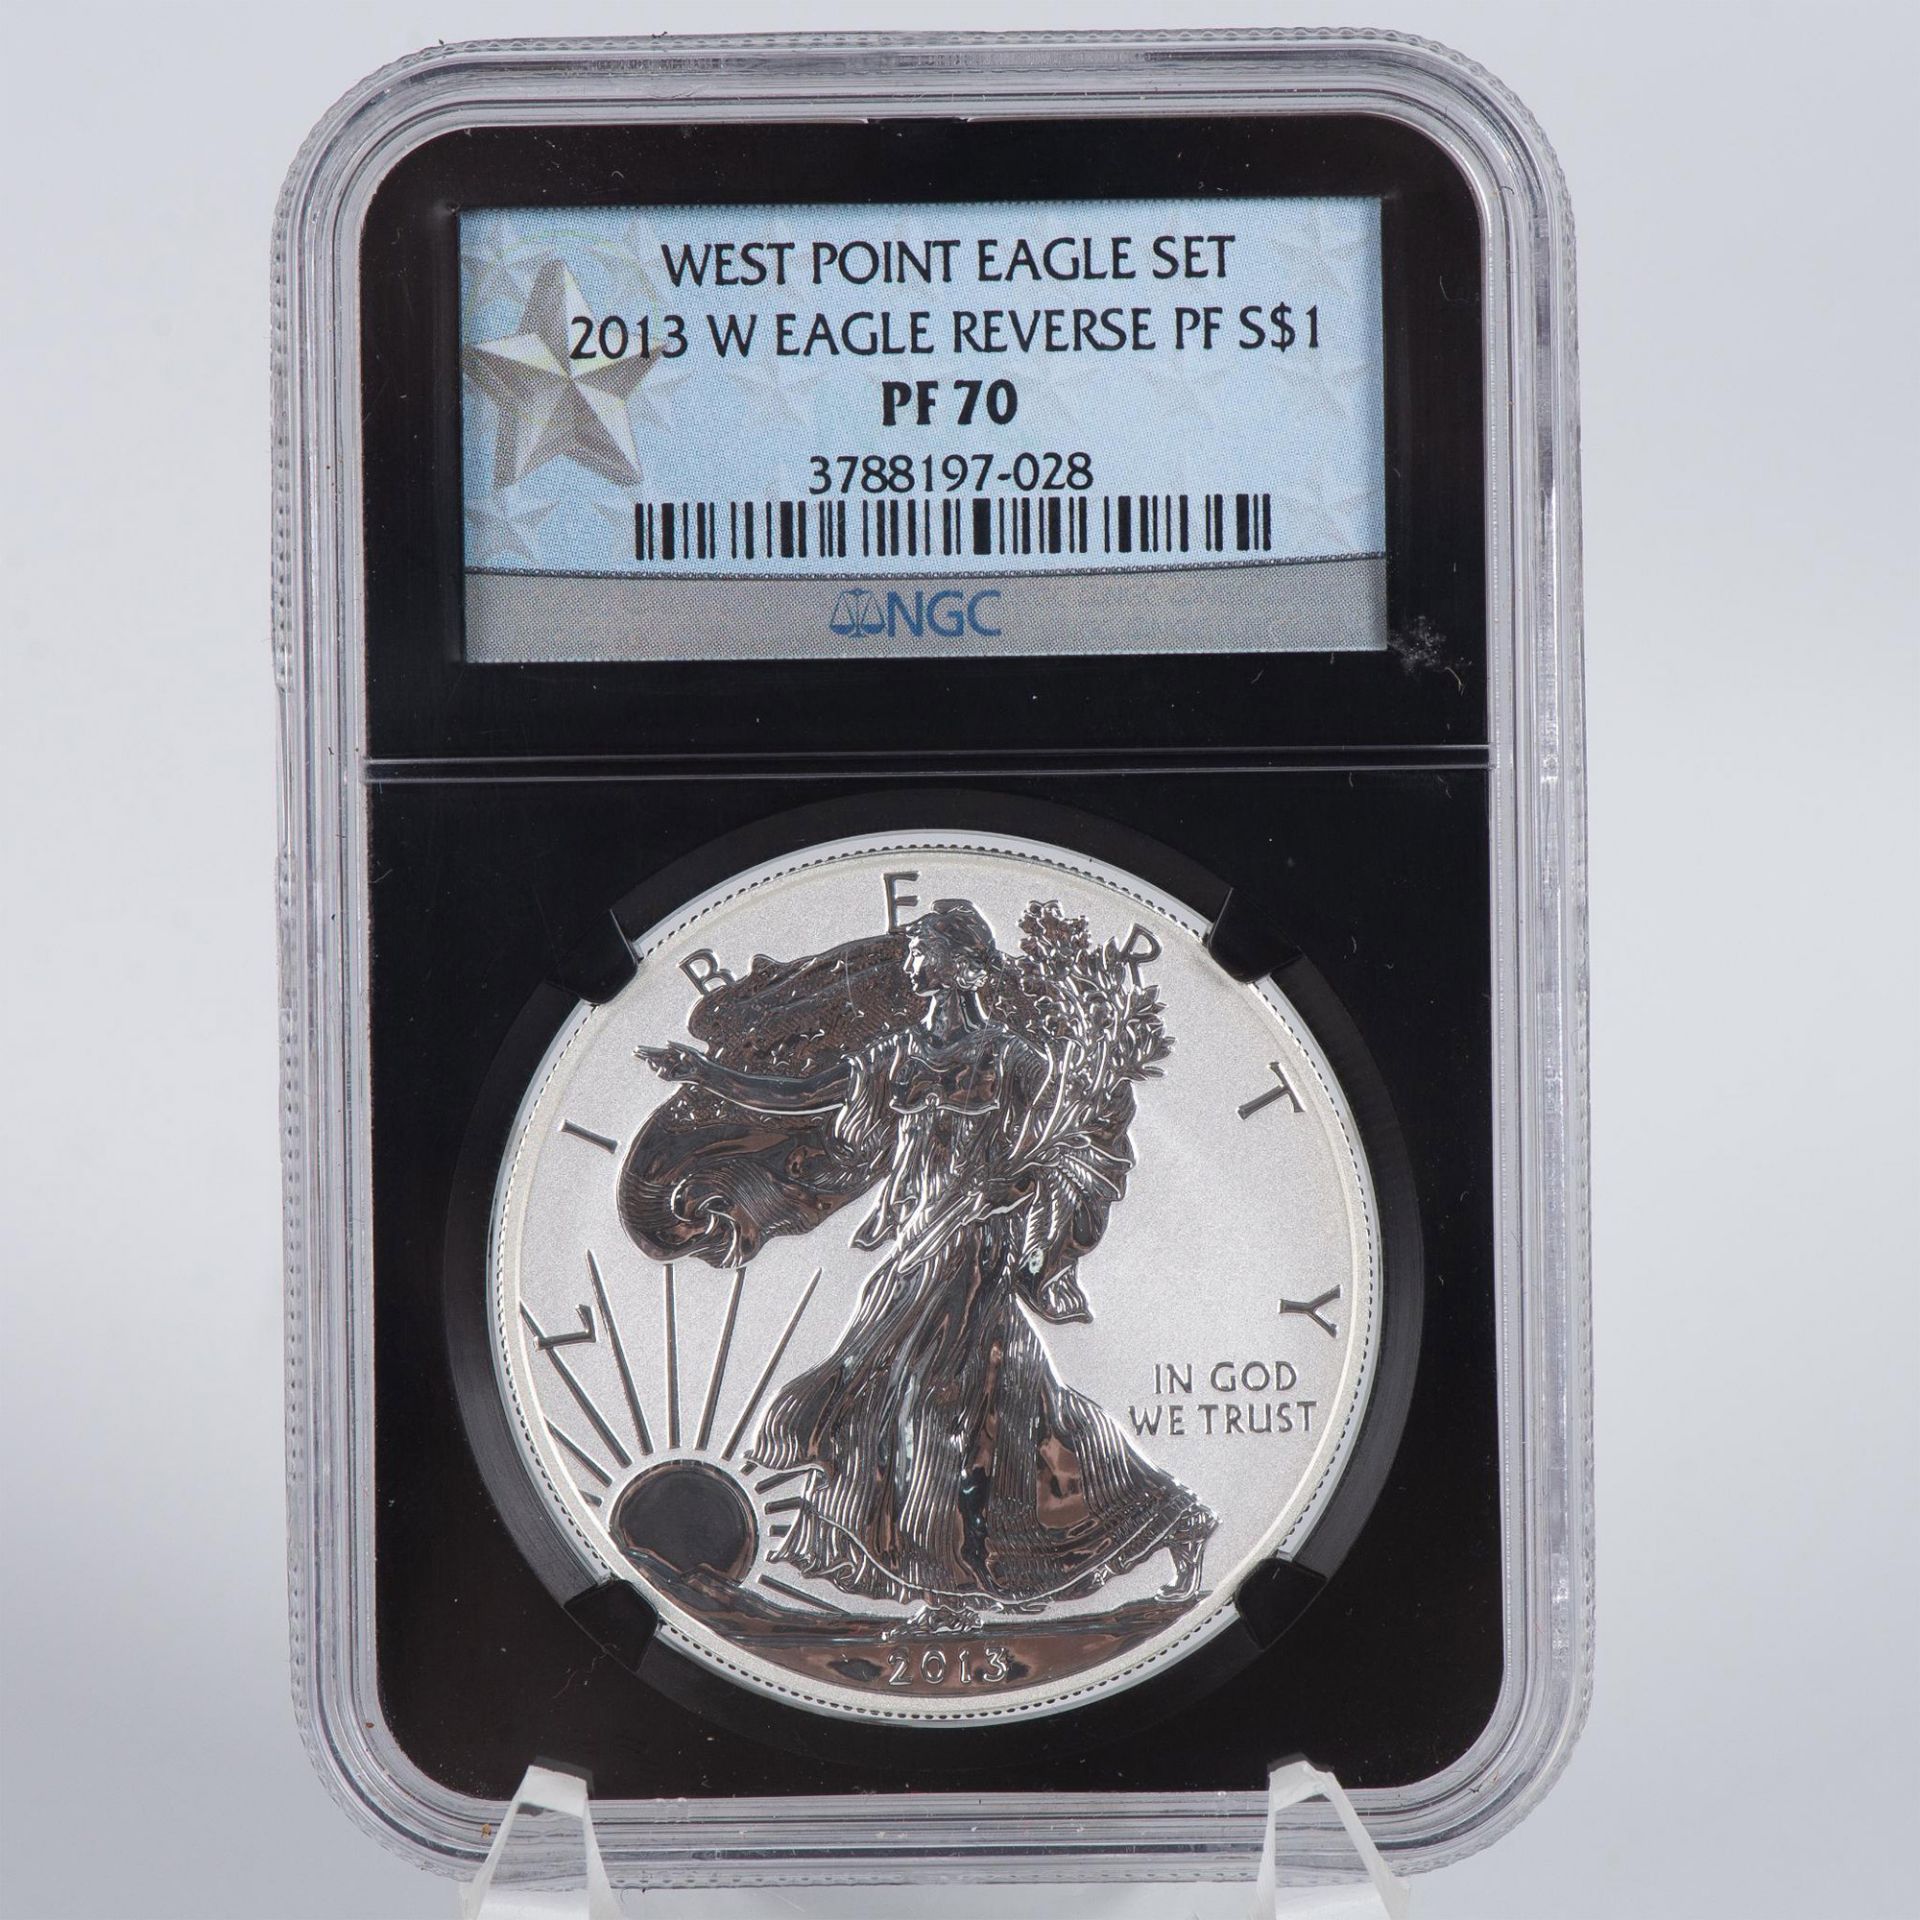 2PC 2013 SILVER EAGLE WEST POINT SET PF70 & SP70 - Image 2 of 7